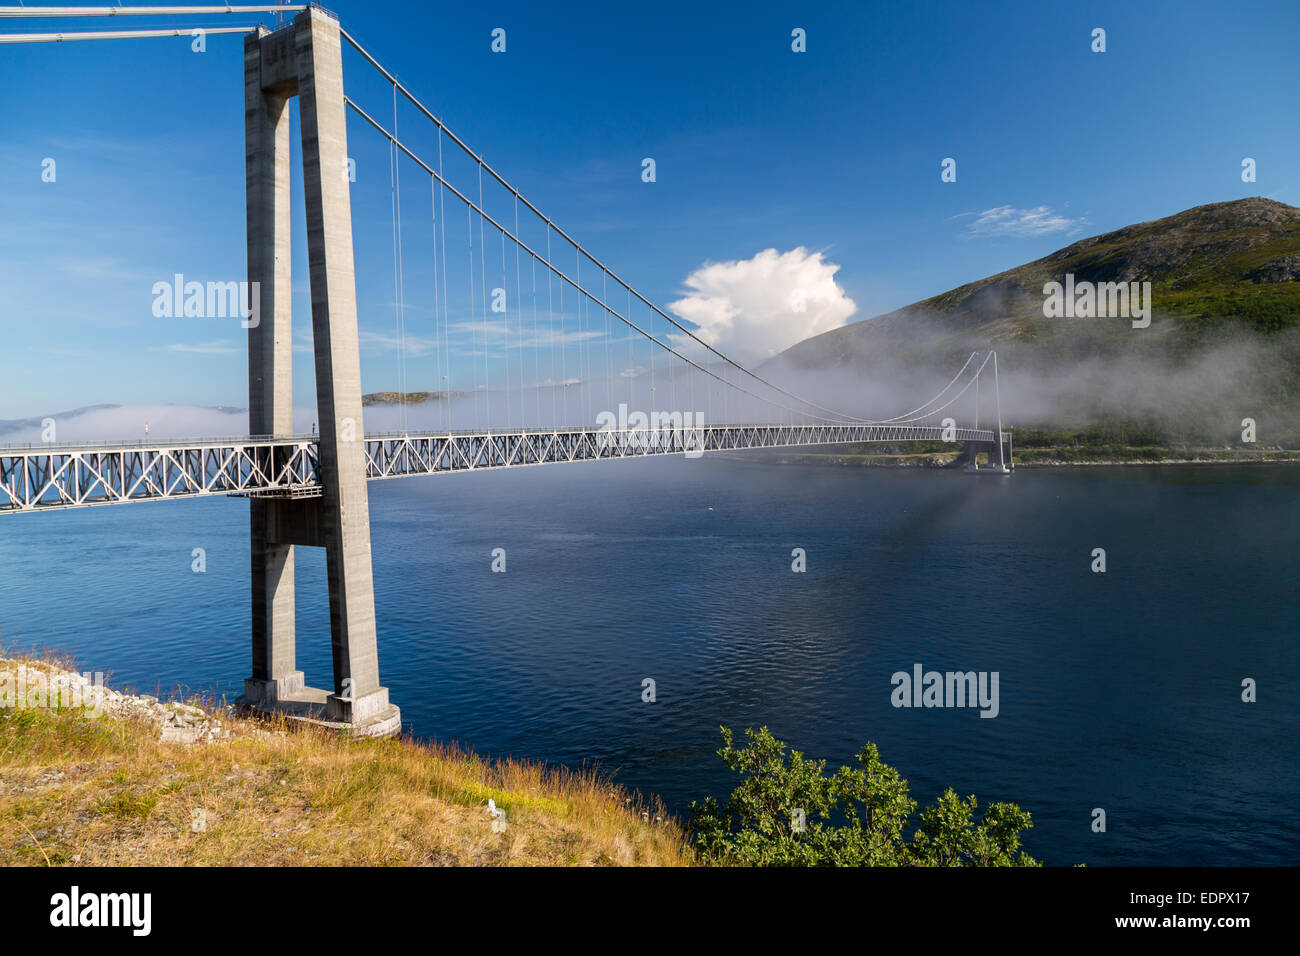 A picture of a hanging bridge in kvalsund, norway Stock Photo